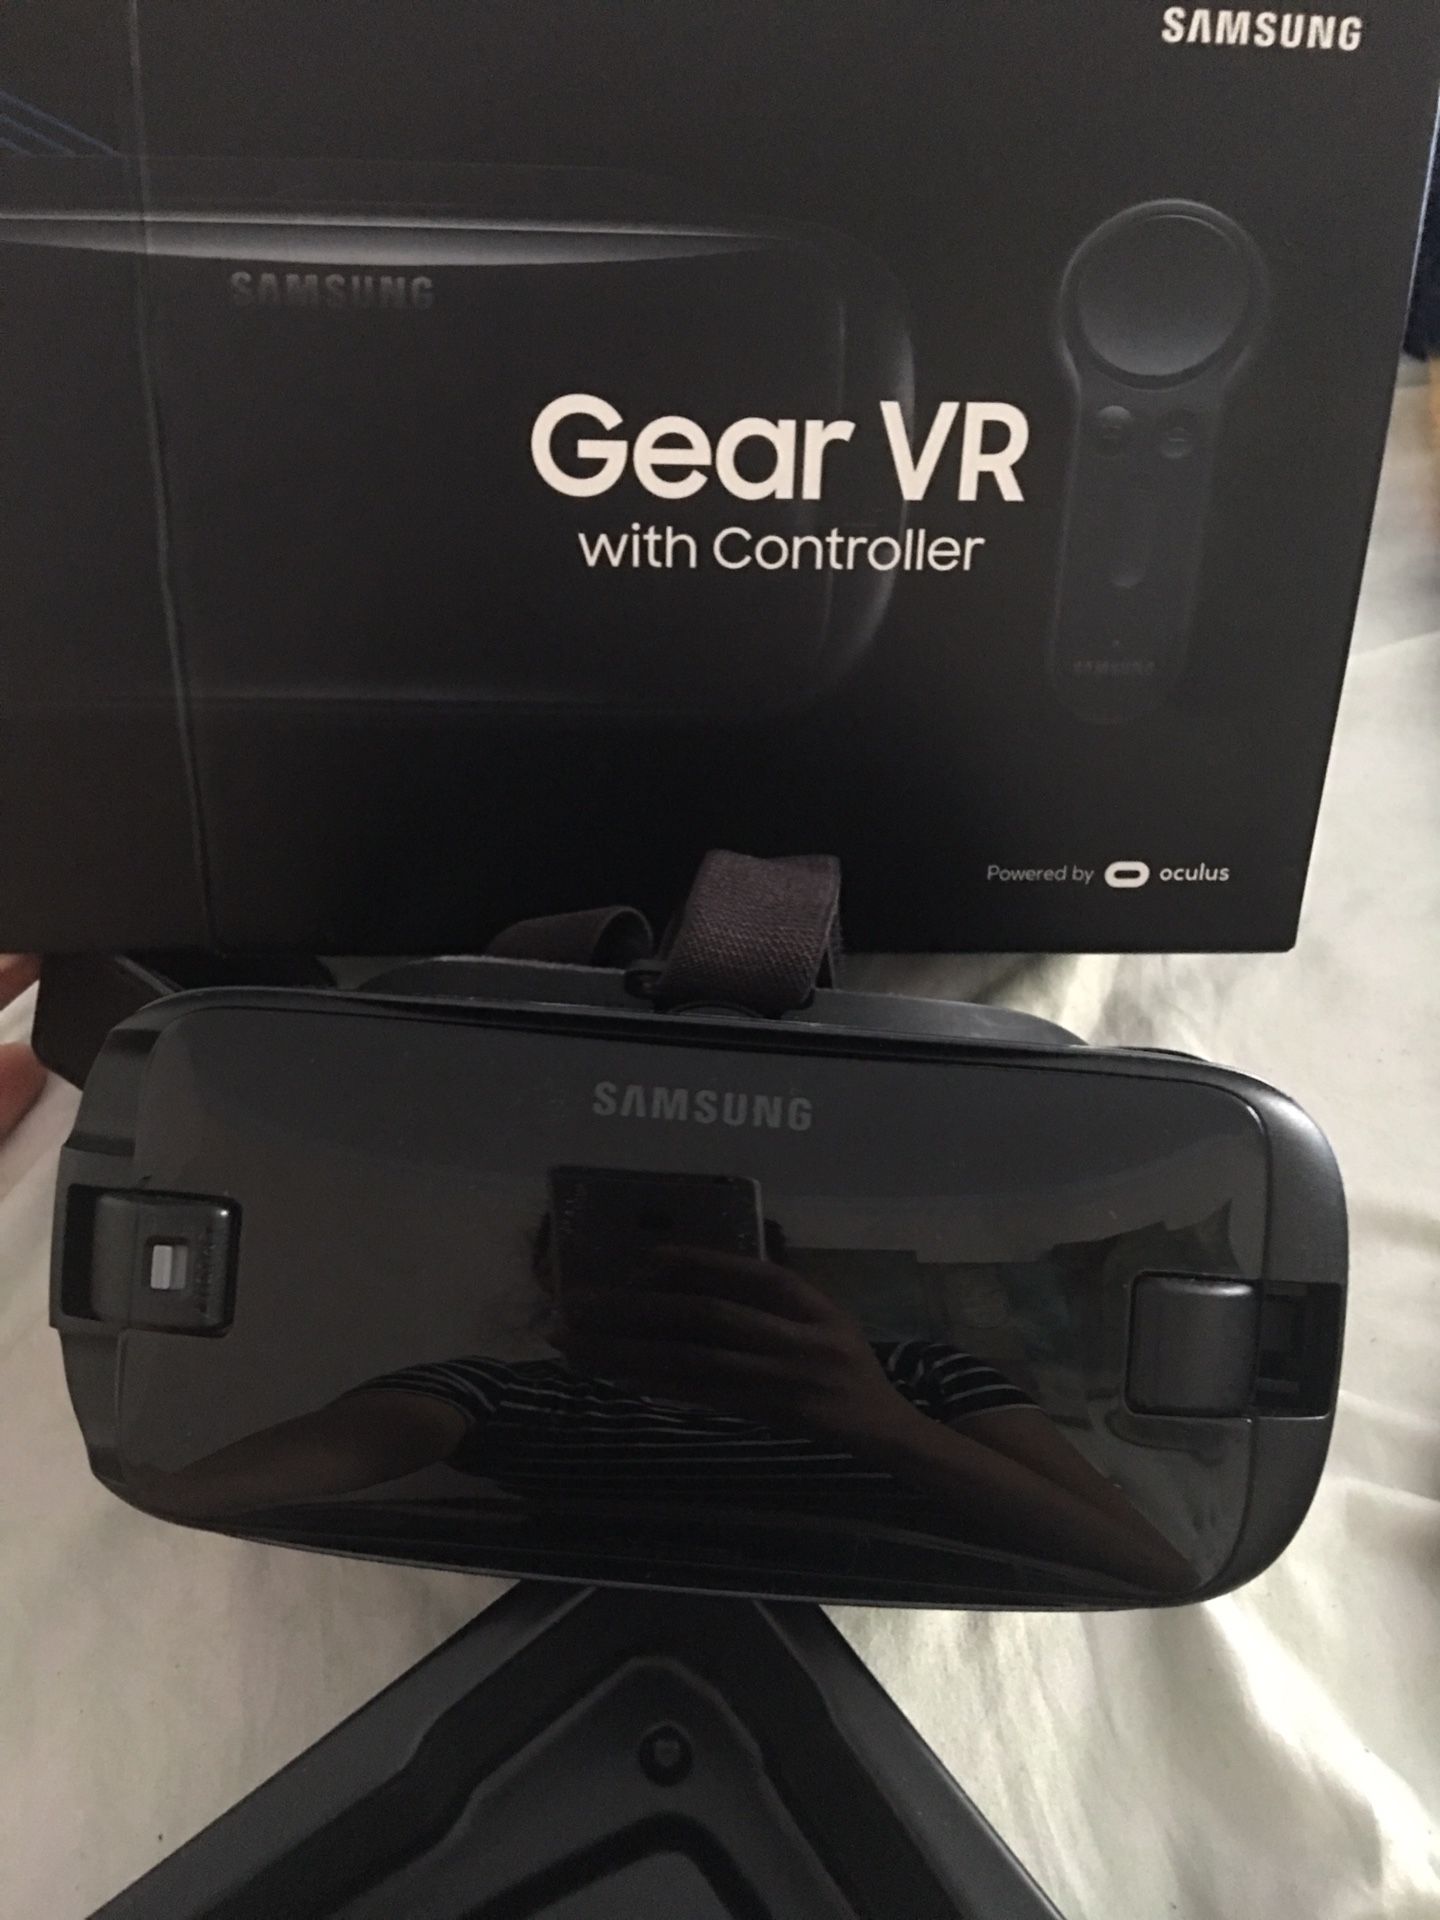 Samsung Gear VR with controller.